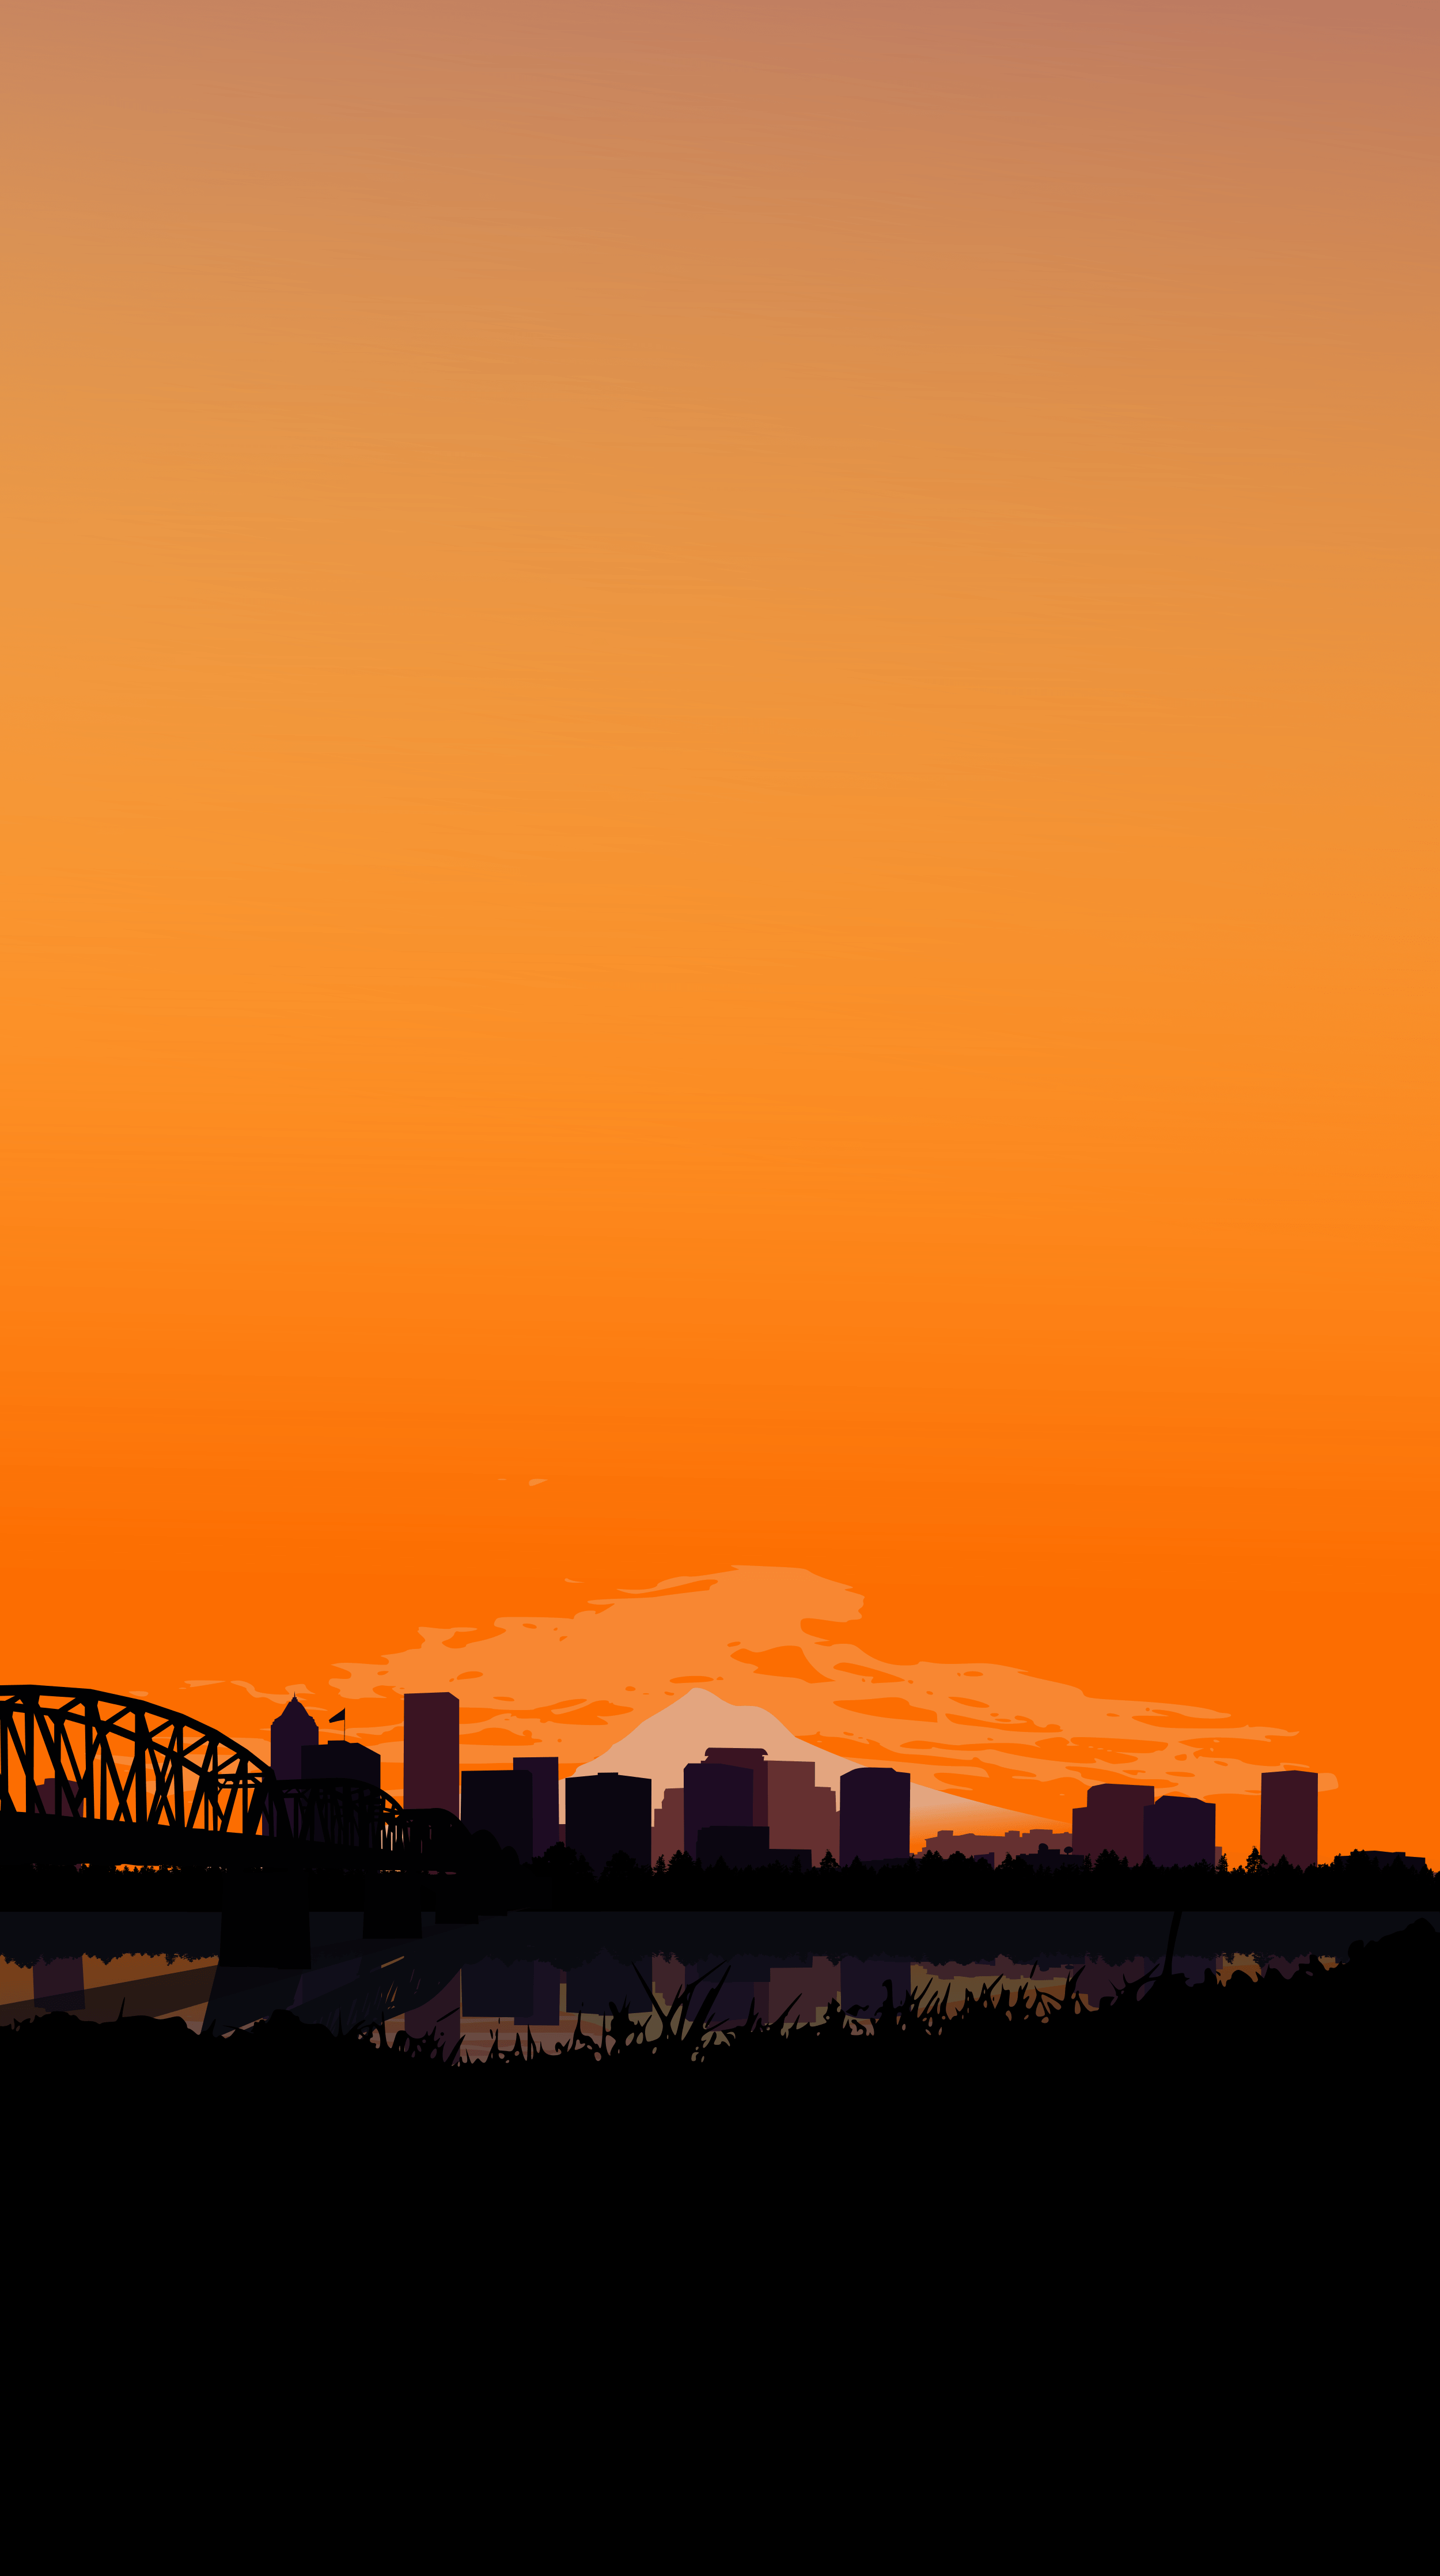 I created a mobile wallpaper for your city!